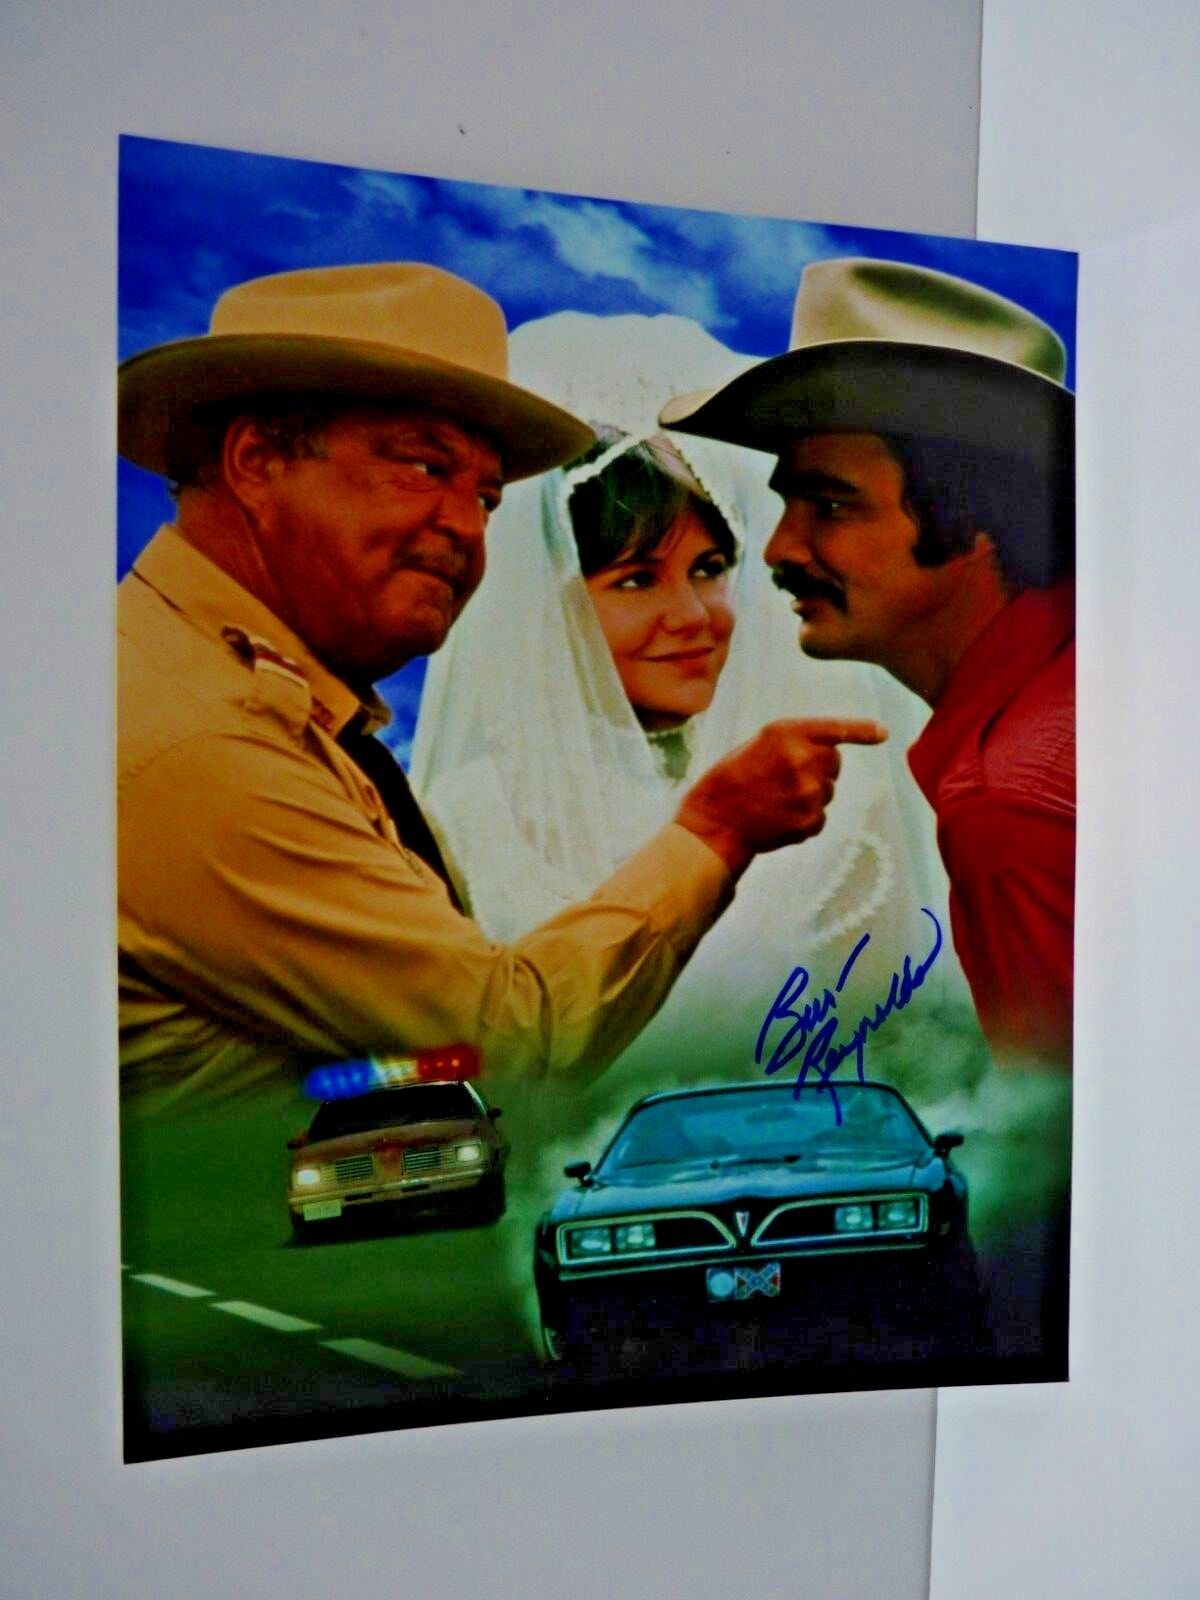 Burt Reynolds Smokey The Bandit Signed Autographed 8x10 Photo Poster painting PSA Certified #2